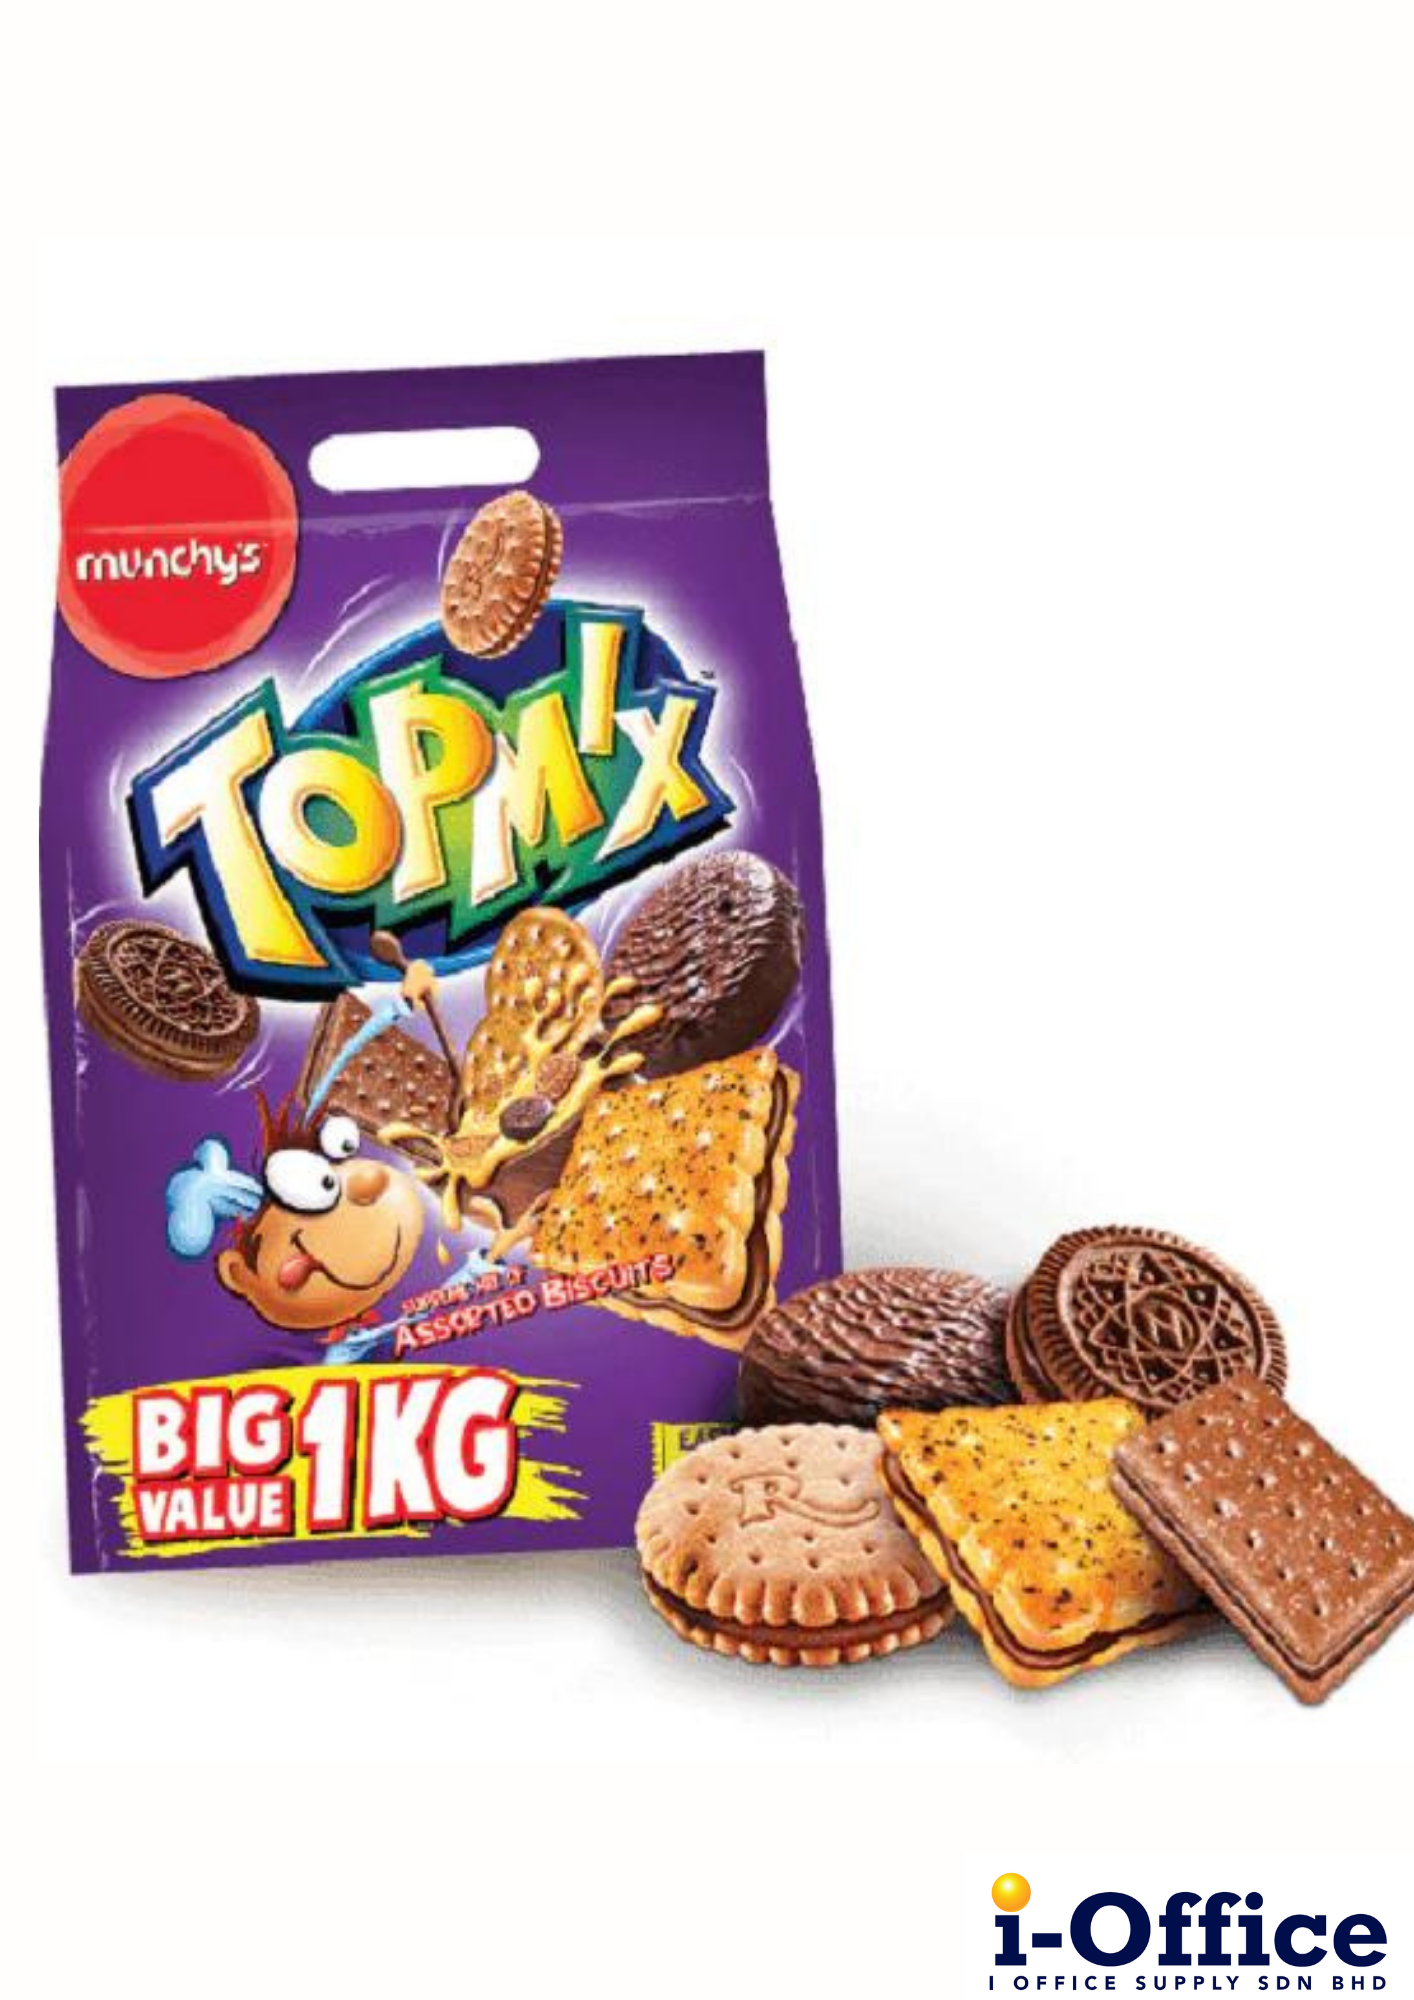 Munchy's Assorted Biscuits Topmix 1kg